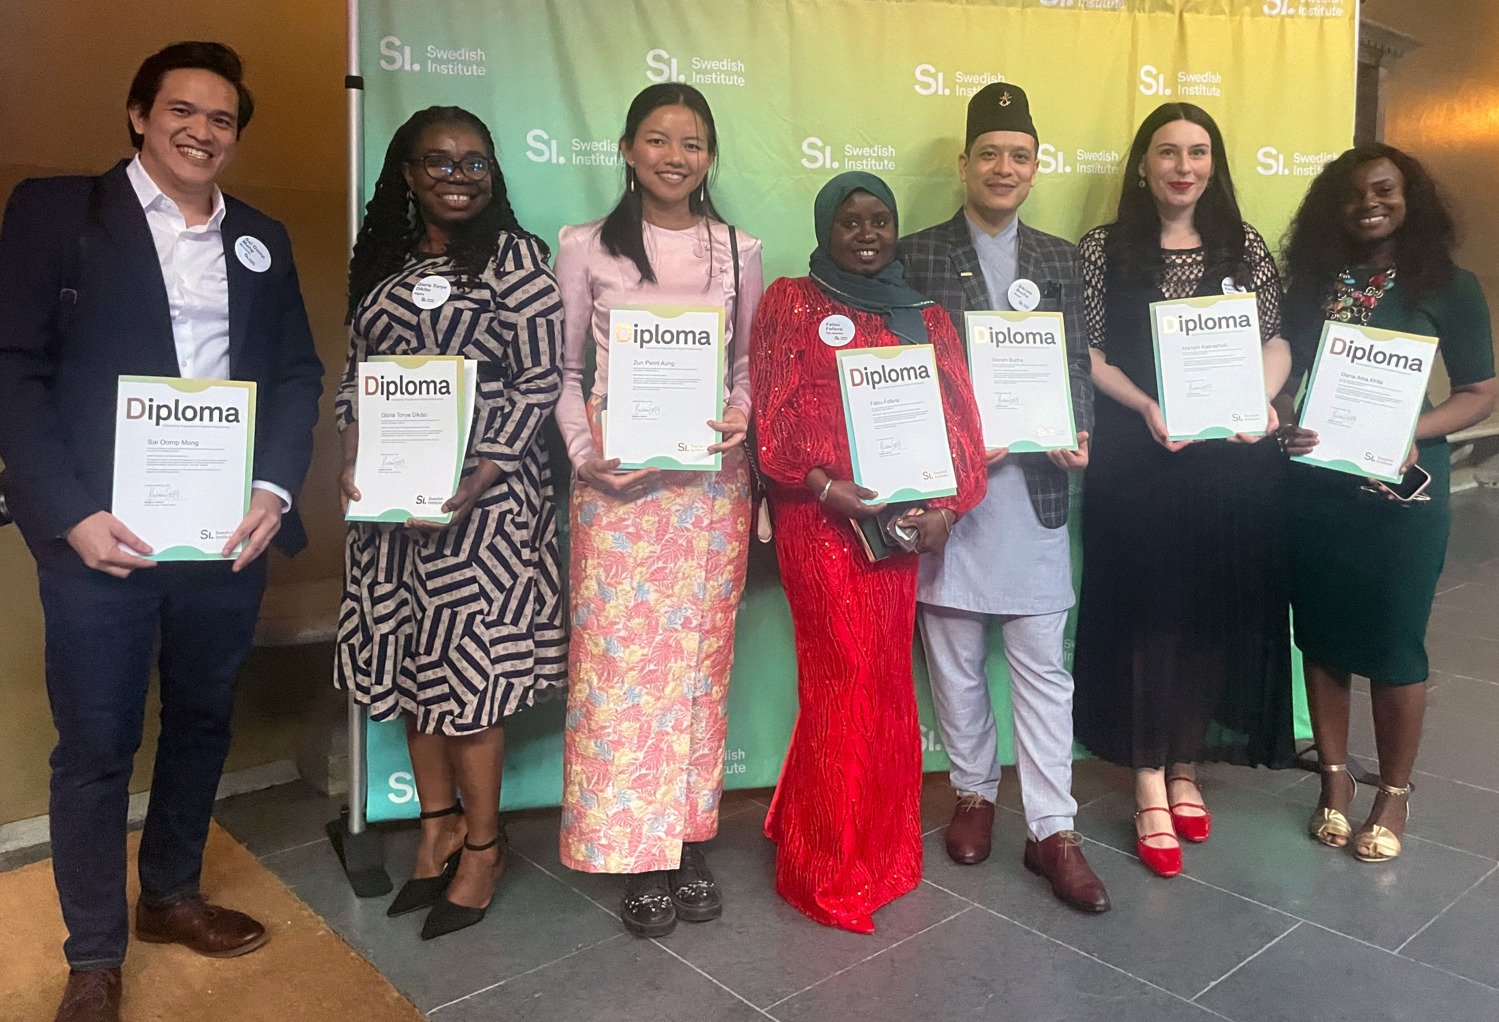 Seven international students smiles and show their diplomas.